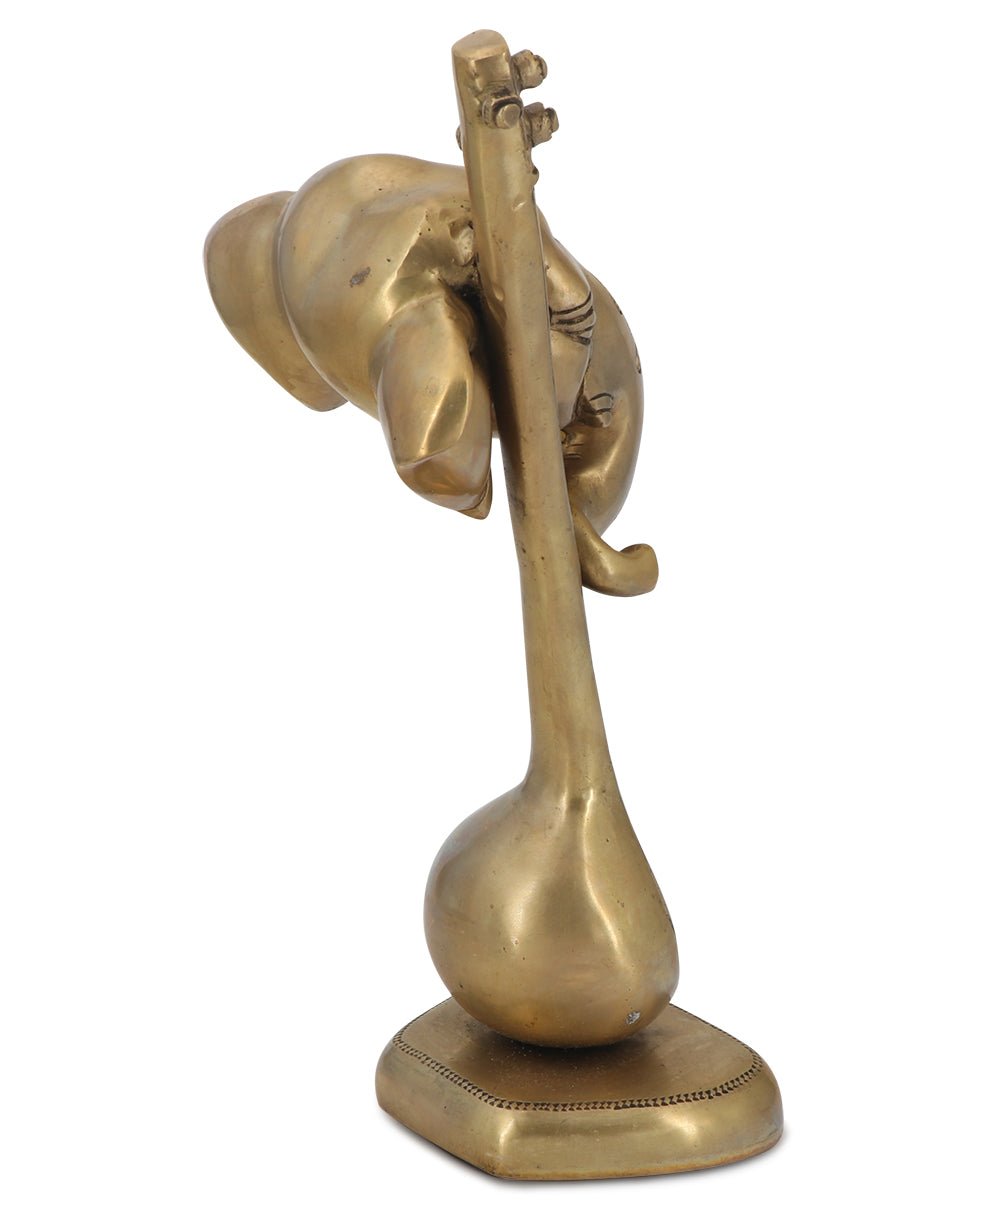 Artistic Abstract Brass Ganesh Statue Playing Sitar - Sculptures & Statues